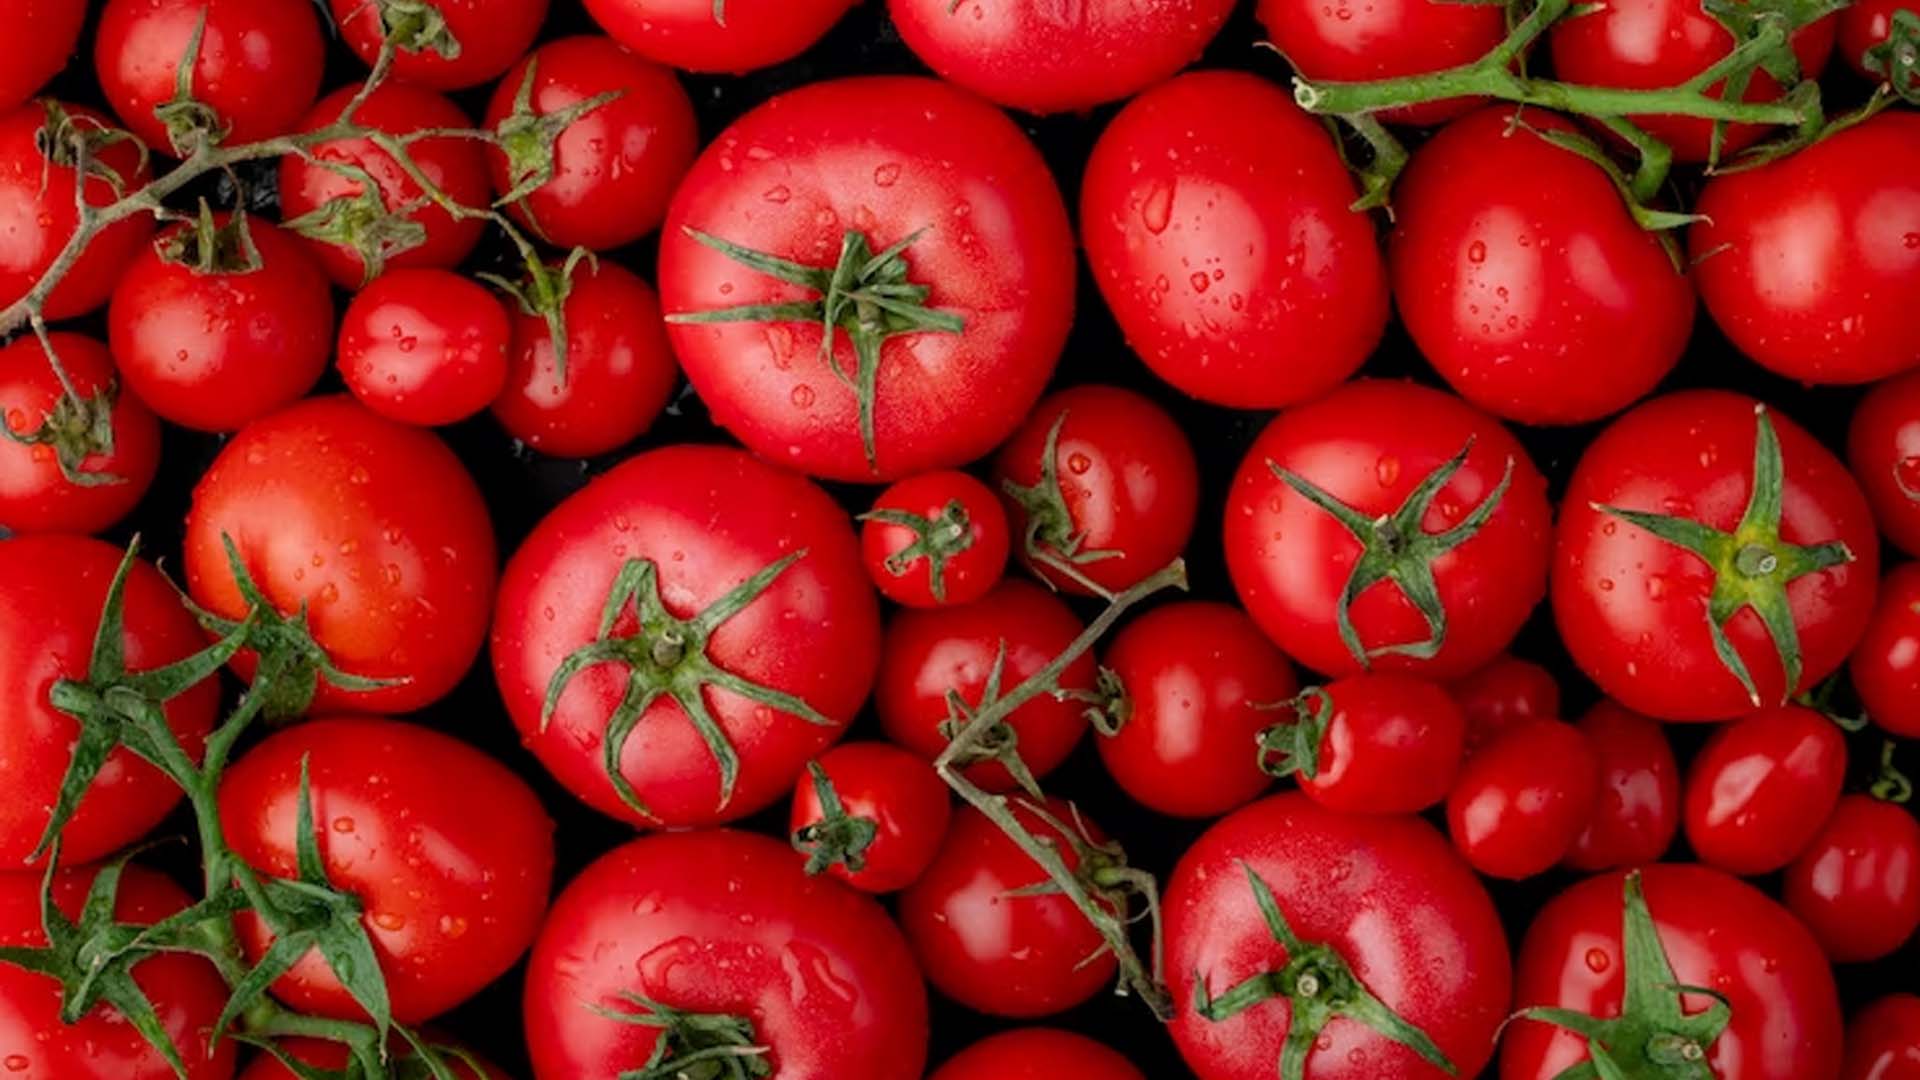 What Causes the Red Color in Tomatoes?